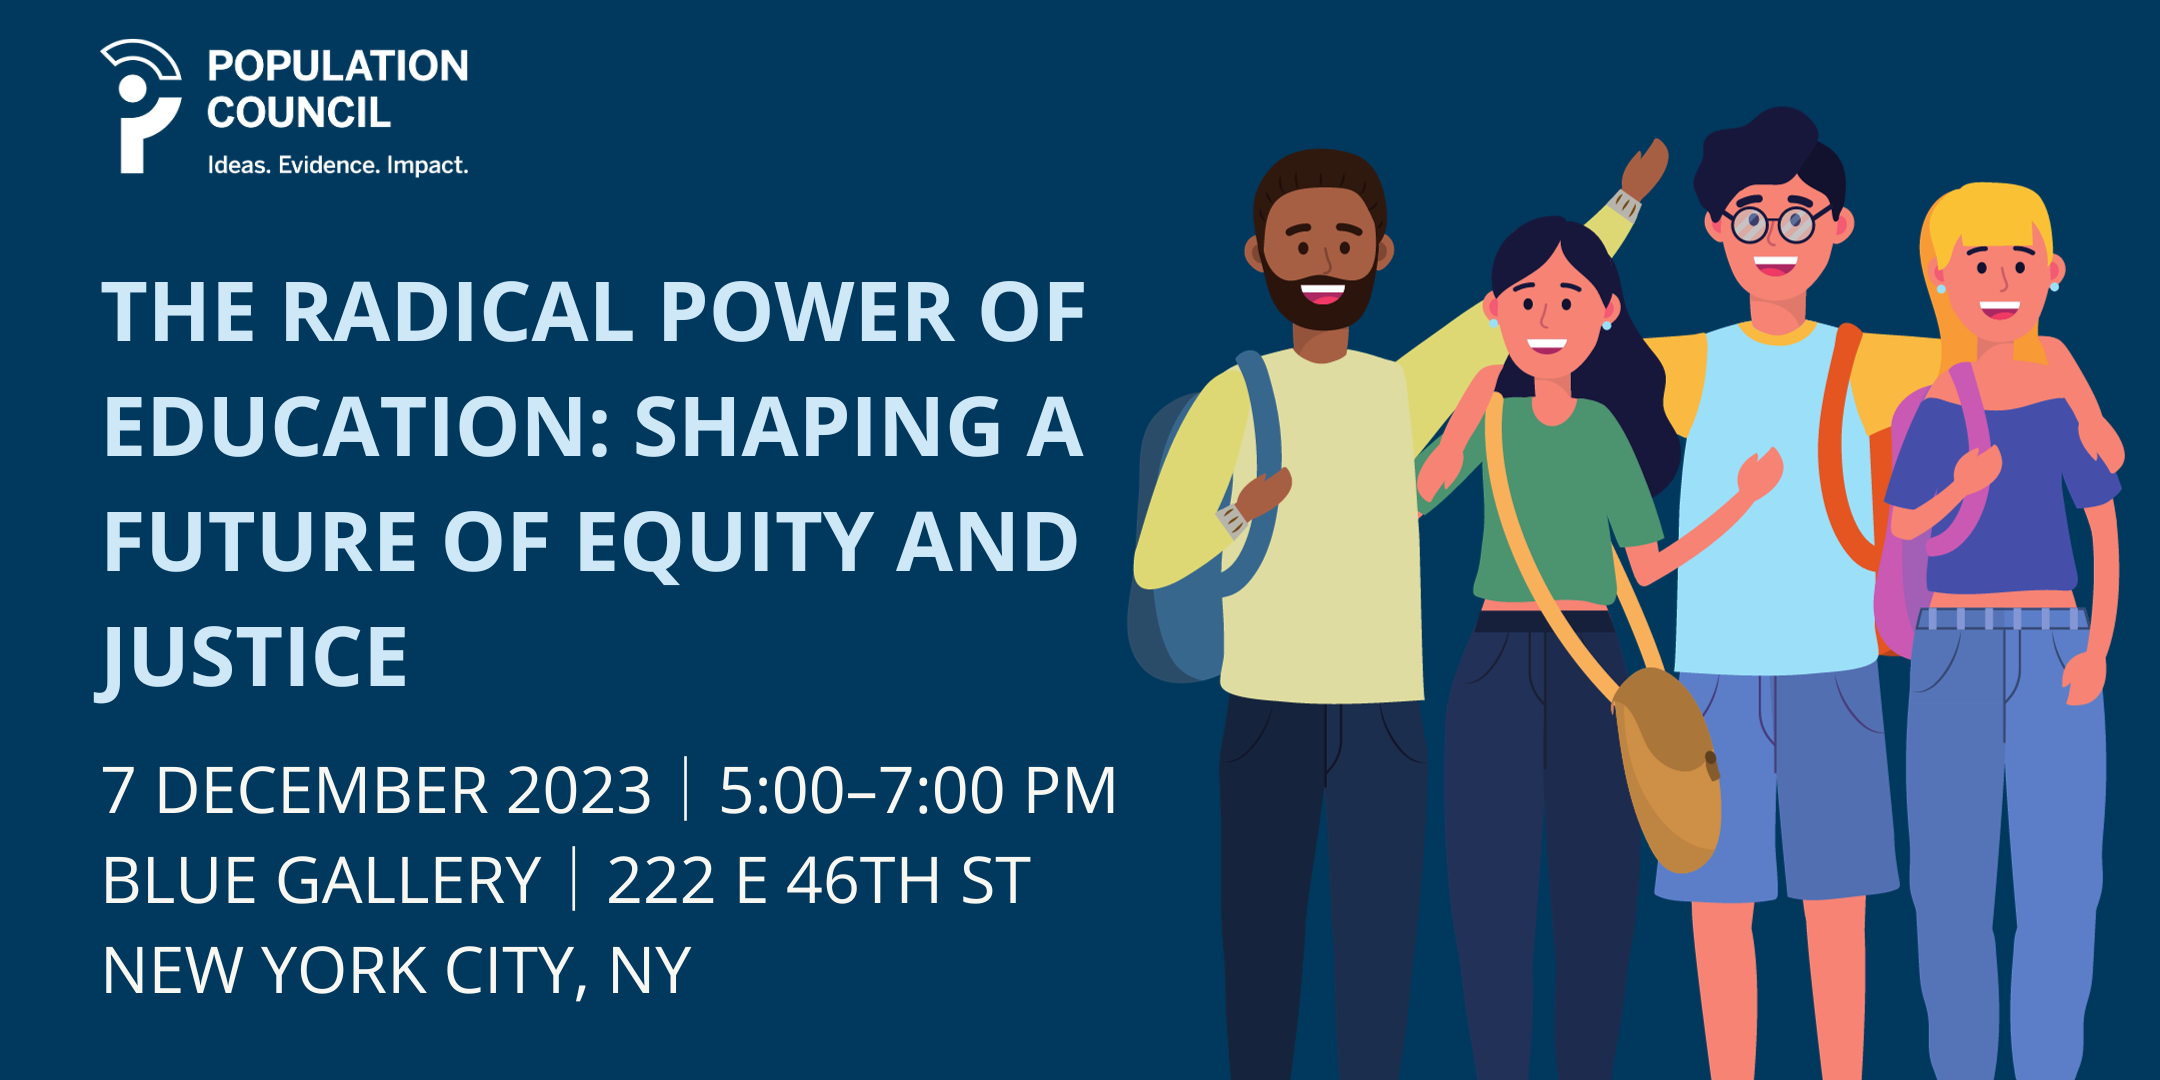 Graphic with event information: The Radical Power of Education: Shaping a Future of Equity and Justice will be held on 7 December from 5 to 7 pm at the Blue Gallery in New York City. The Blue Gallery is located at 222 East 46th St.